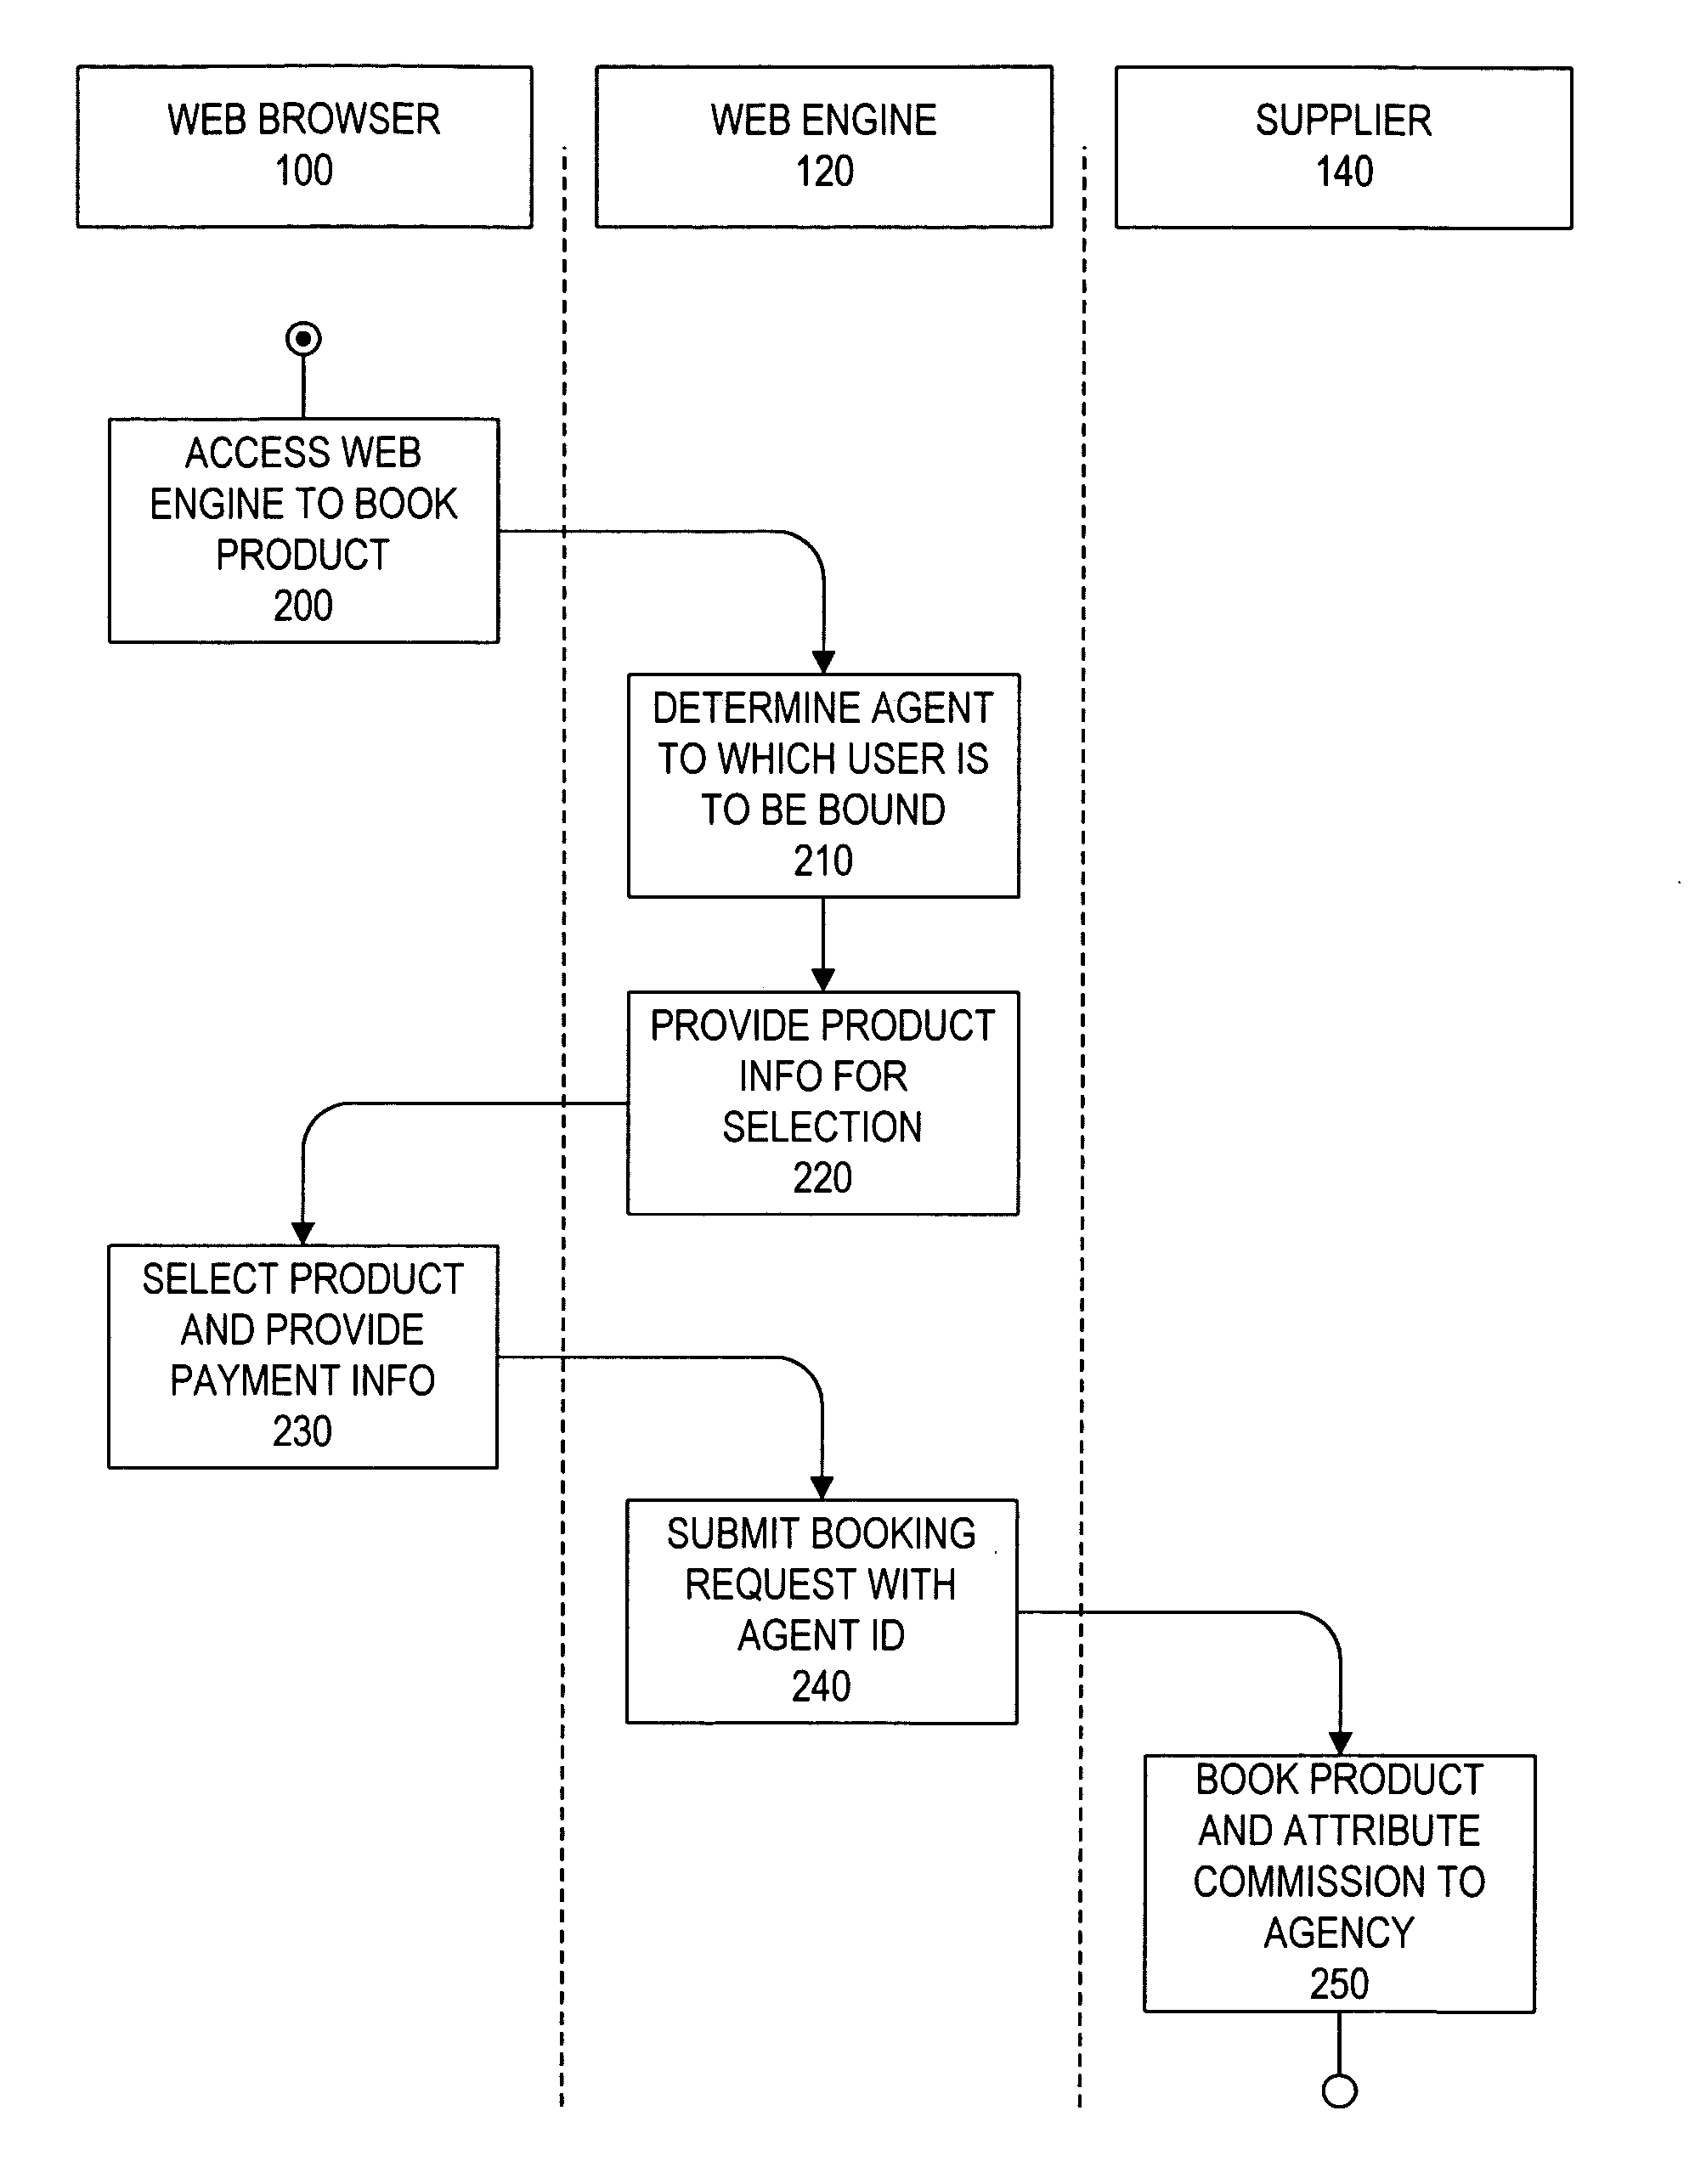 System and method for territory based commission attribution